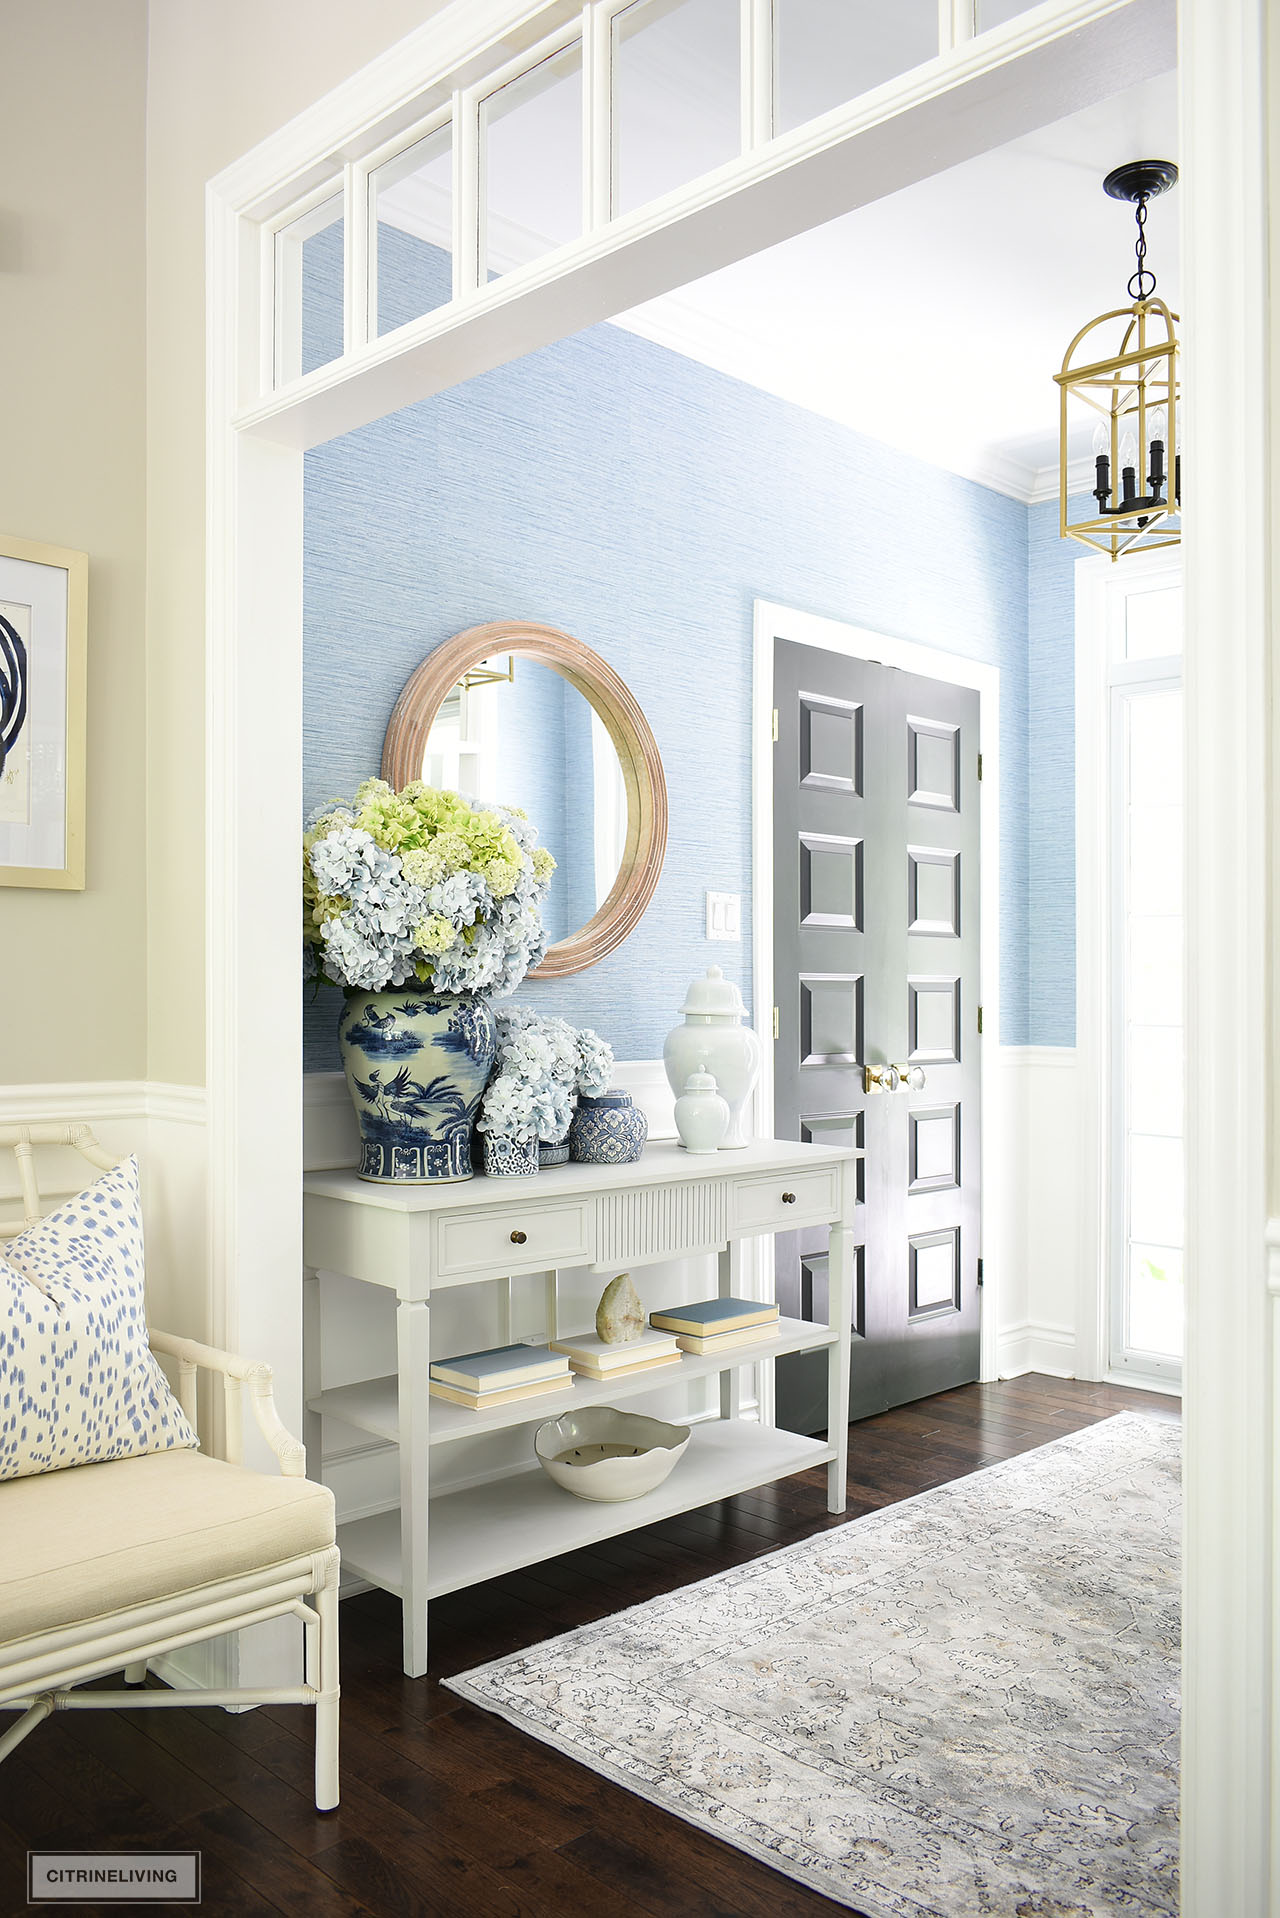 An entryway decorated for summer with classic blue and white vases and jars, styled with beautiful faux hydrangeas.